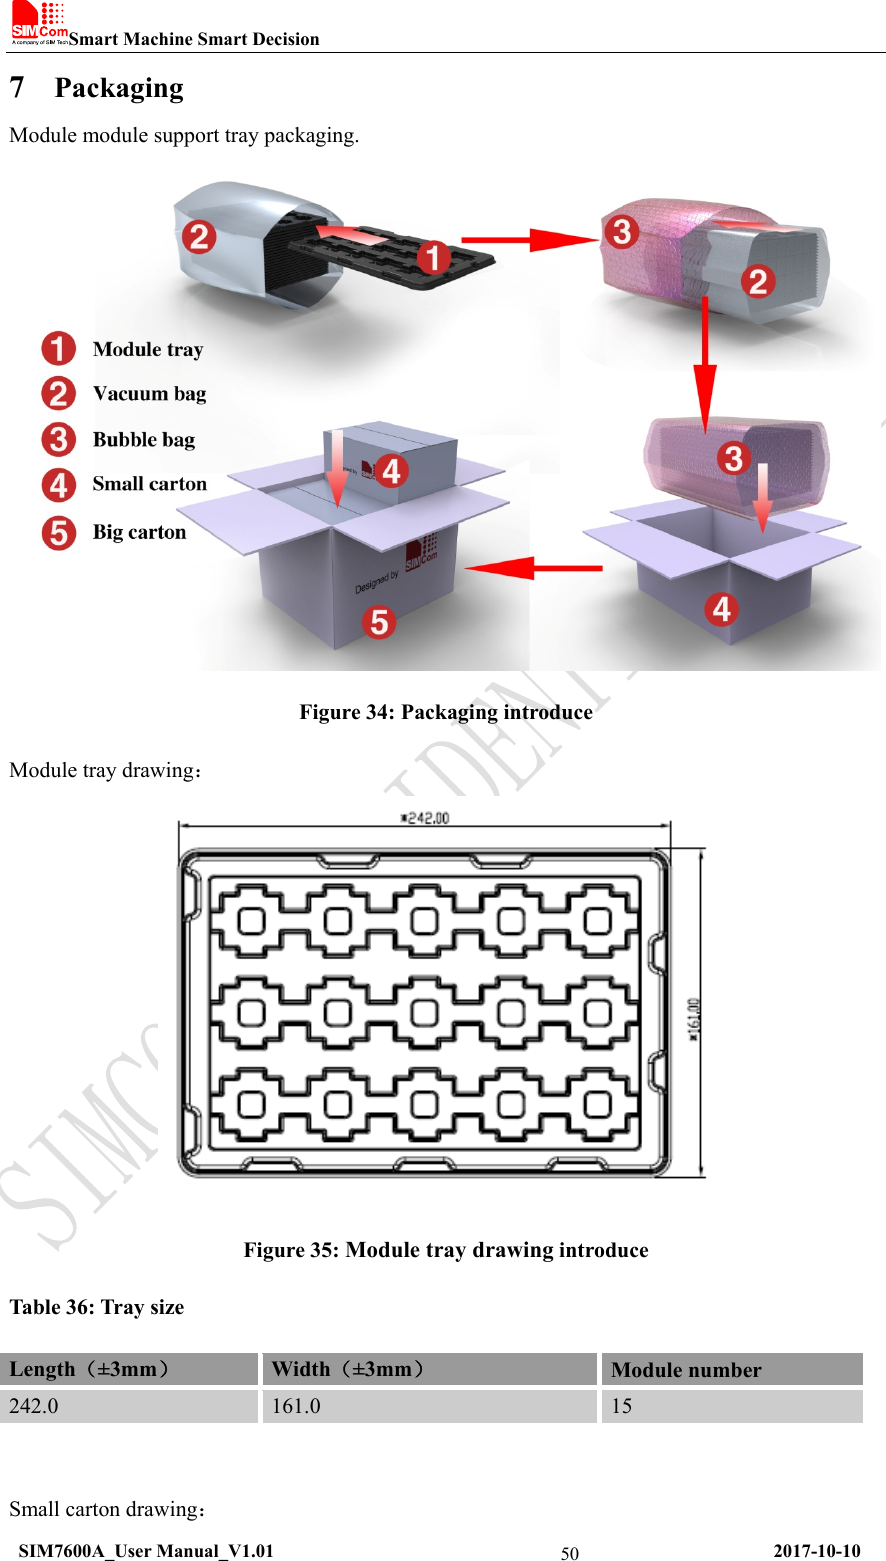 Smart Machine Smart Decision  SIM7600A_User Manual_V1.01                                                     2017-10-10 507 Packaging Module module support tray packaging.  Figure 34: Packaging introduce Module tray drawing：  Figure 35: Module tray drawing introduce Table 36: Tray size Length（±3mm） Width（±3mm） Module number 242.0  161.0  15   Small carton drawing： 